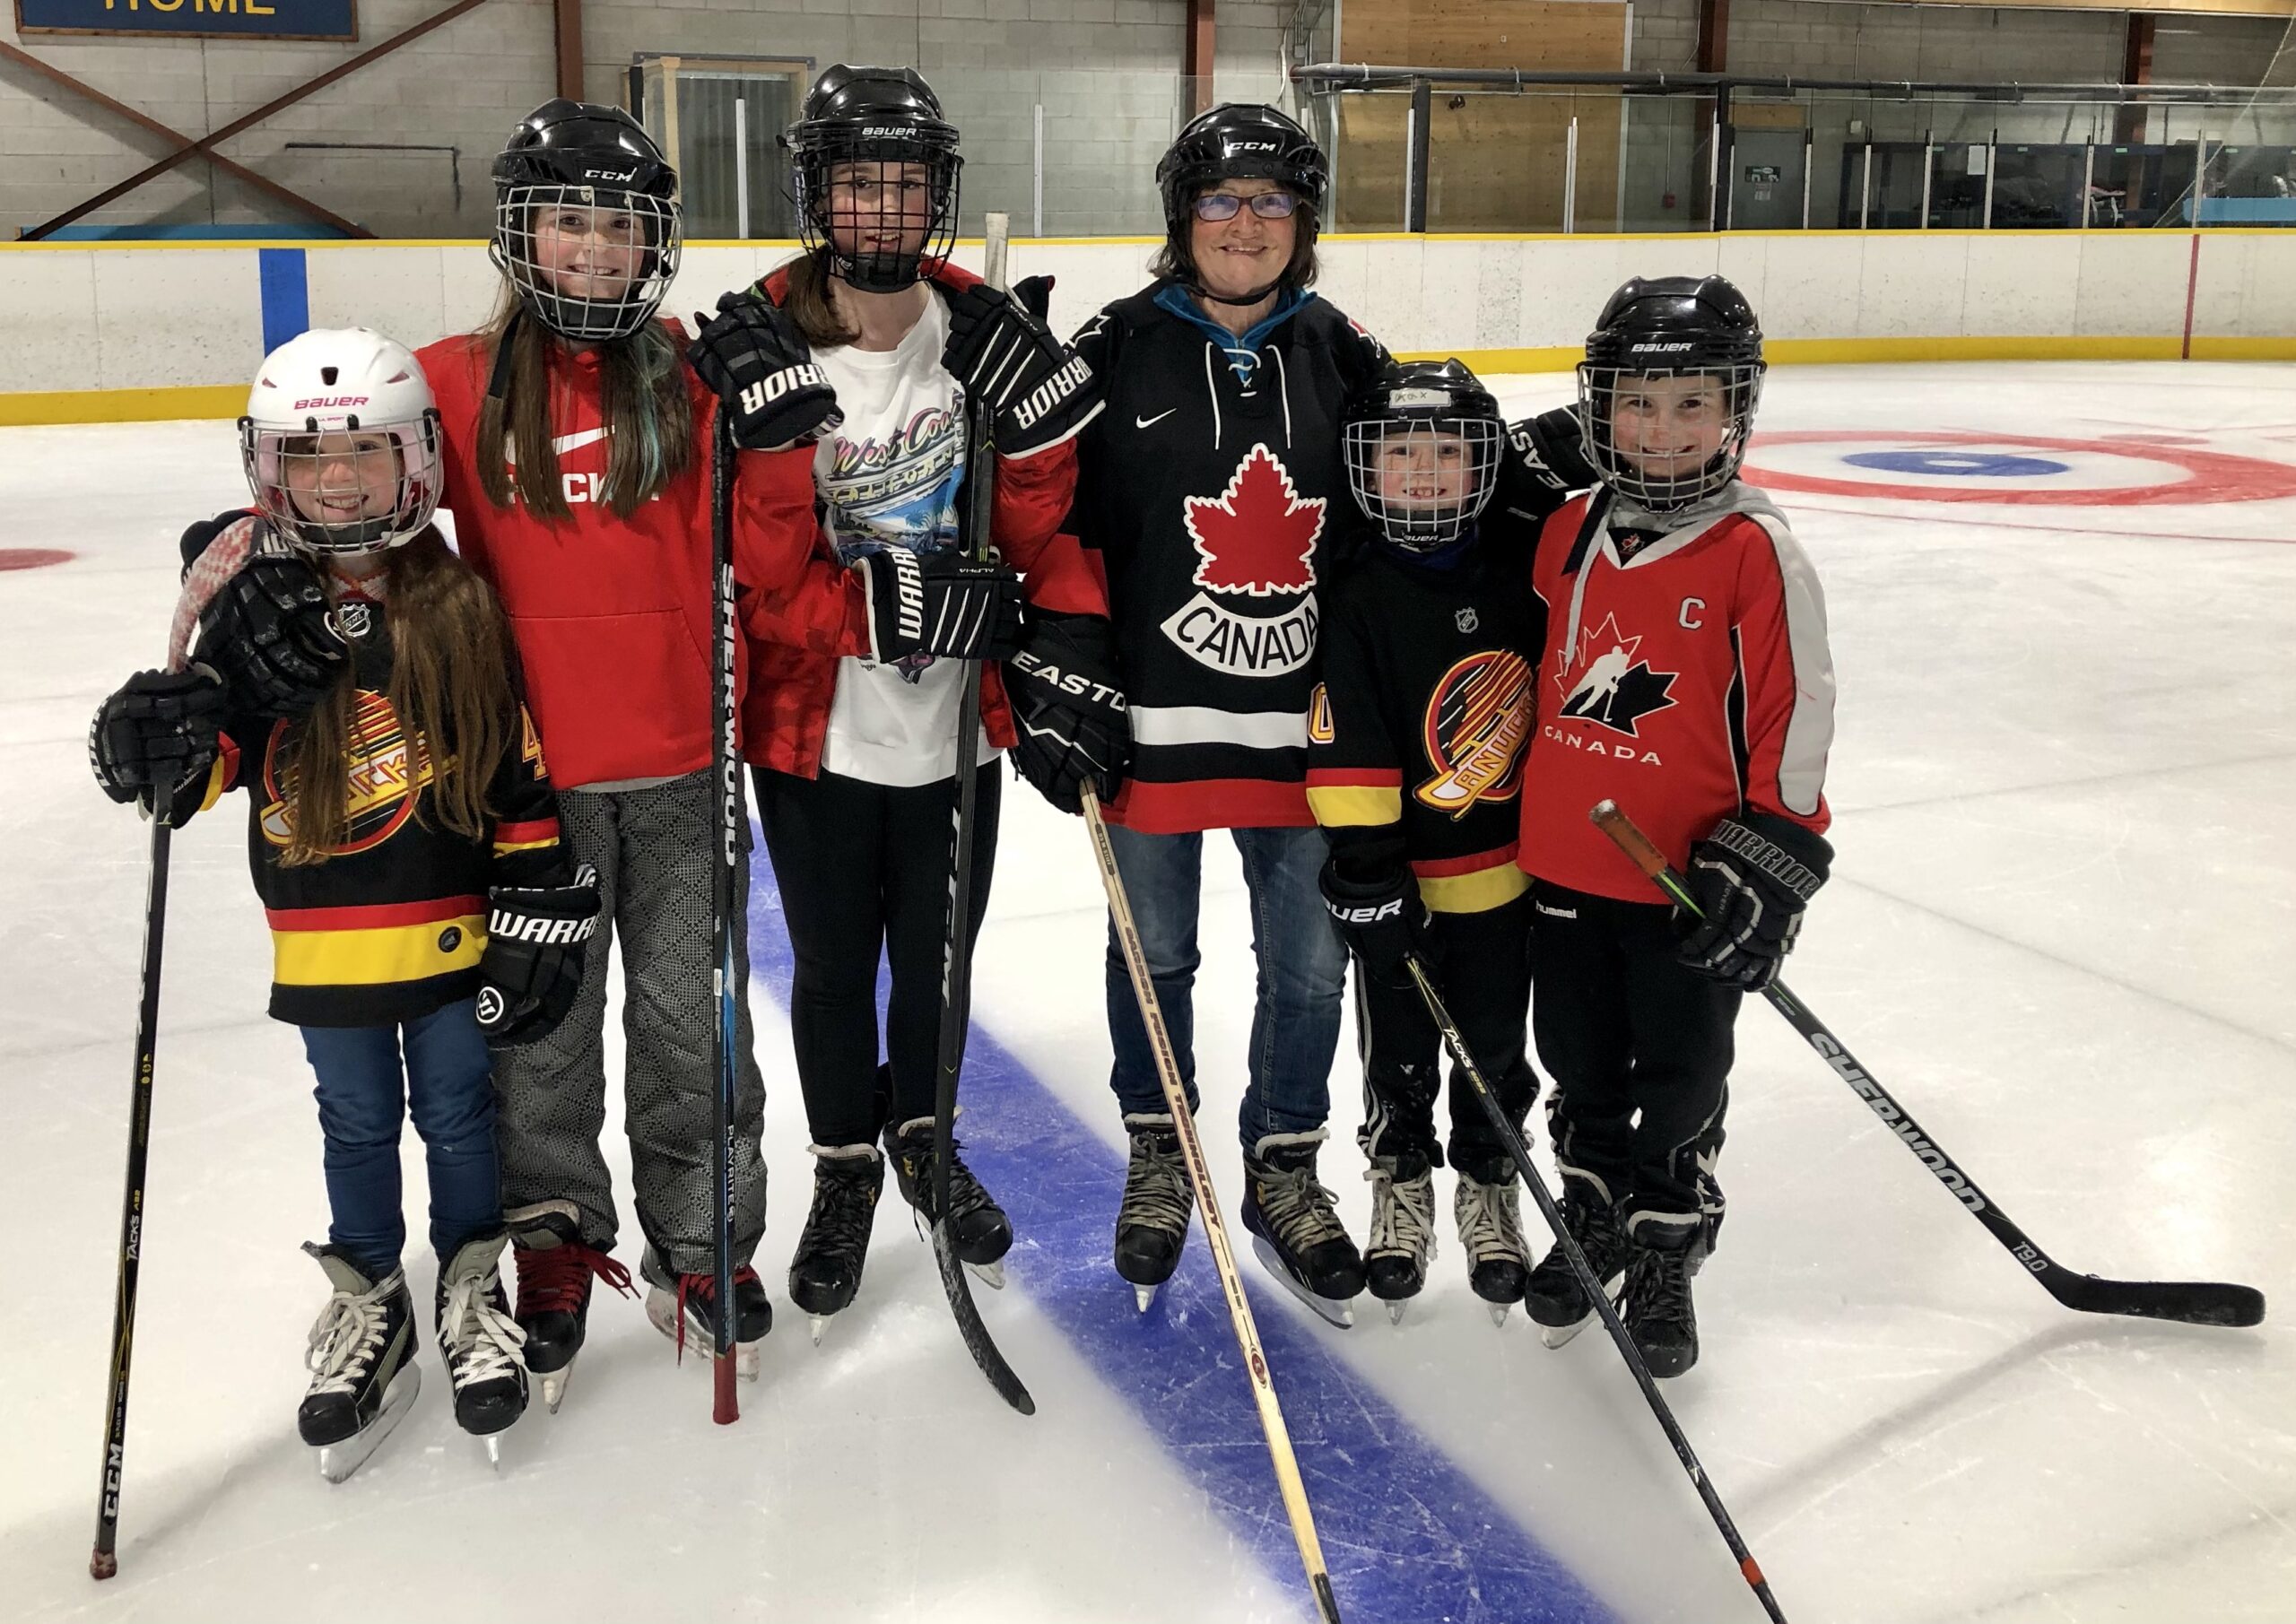 Mom Valerie on ice with young hockey players.